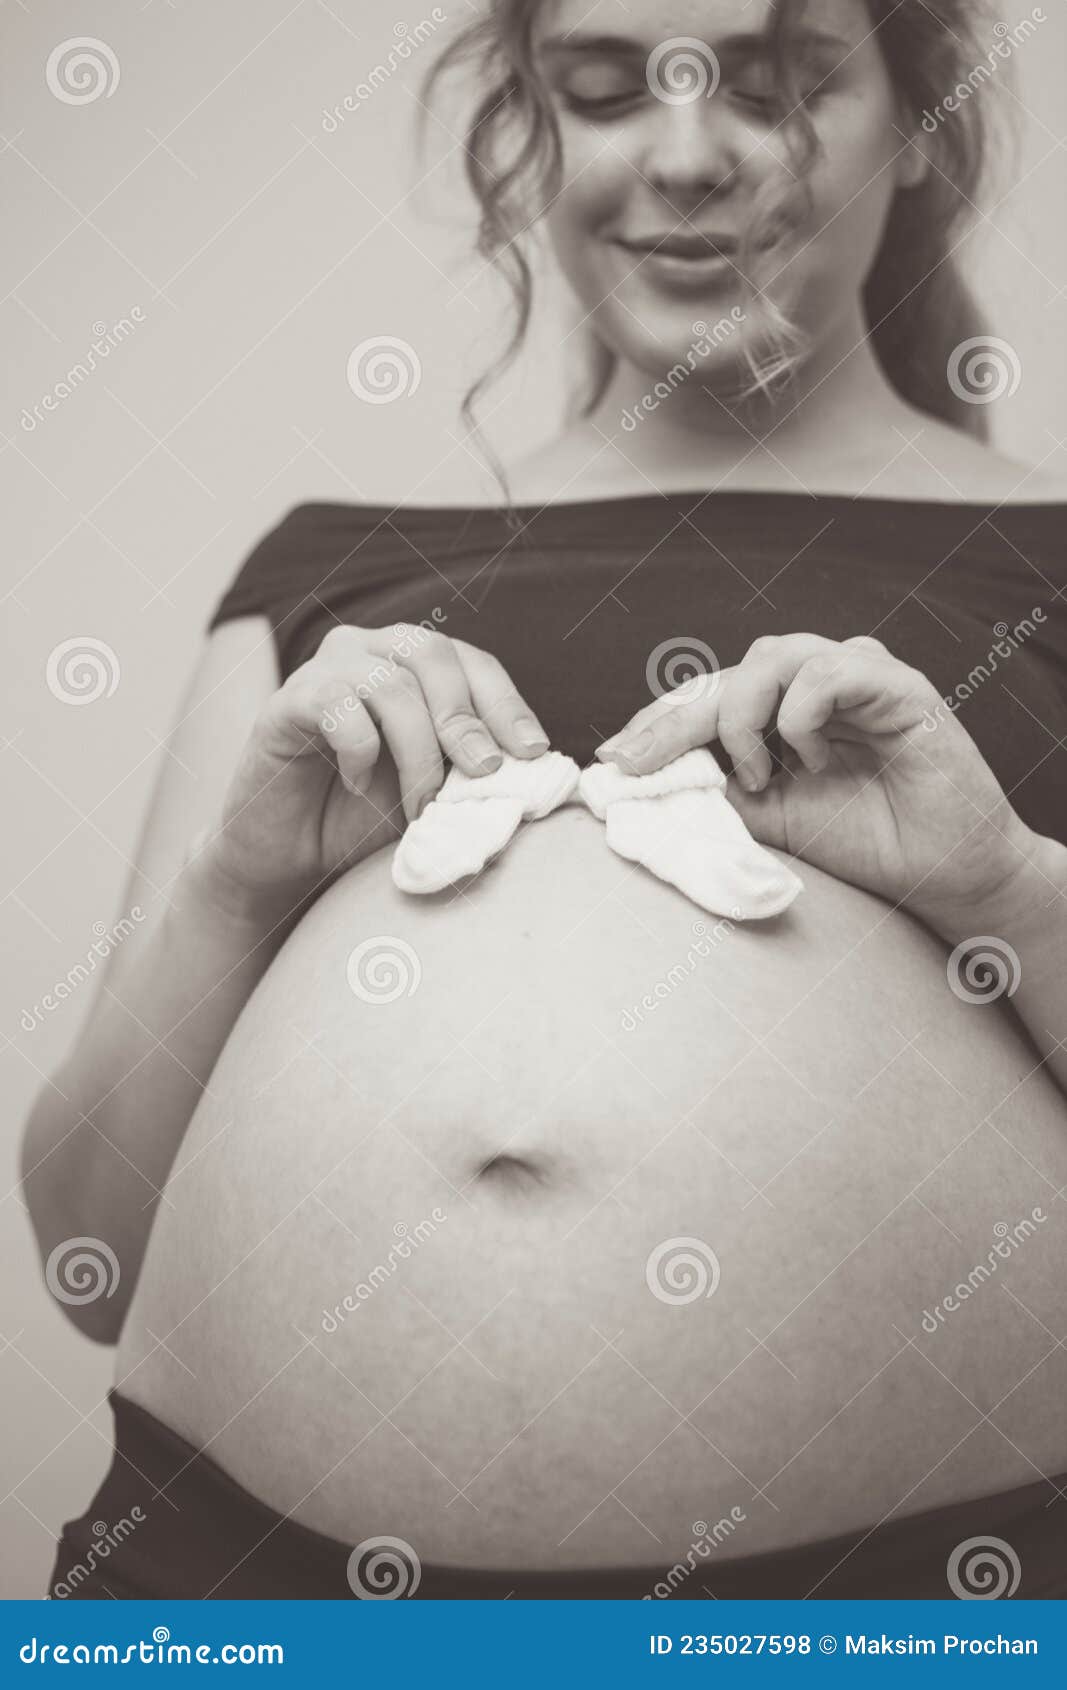 Touching Photo of Pregnancy Moments Young Expectant Mother with